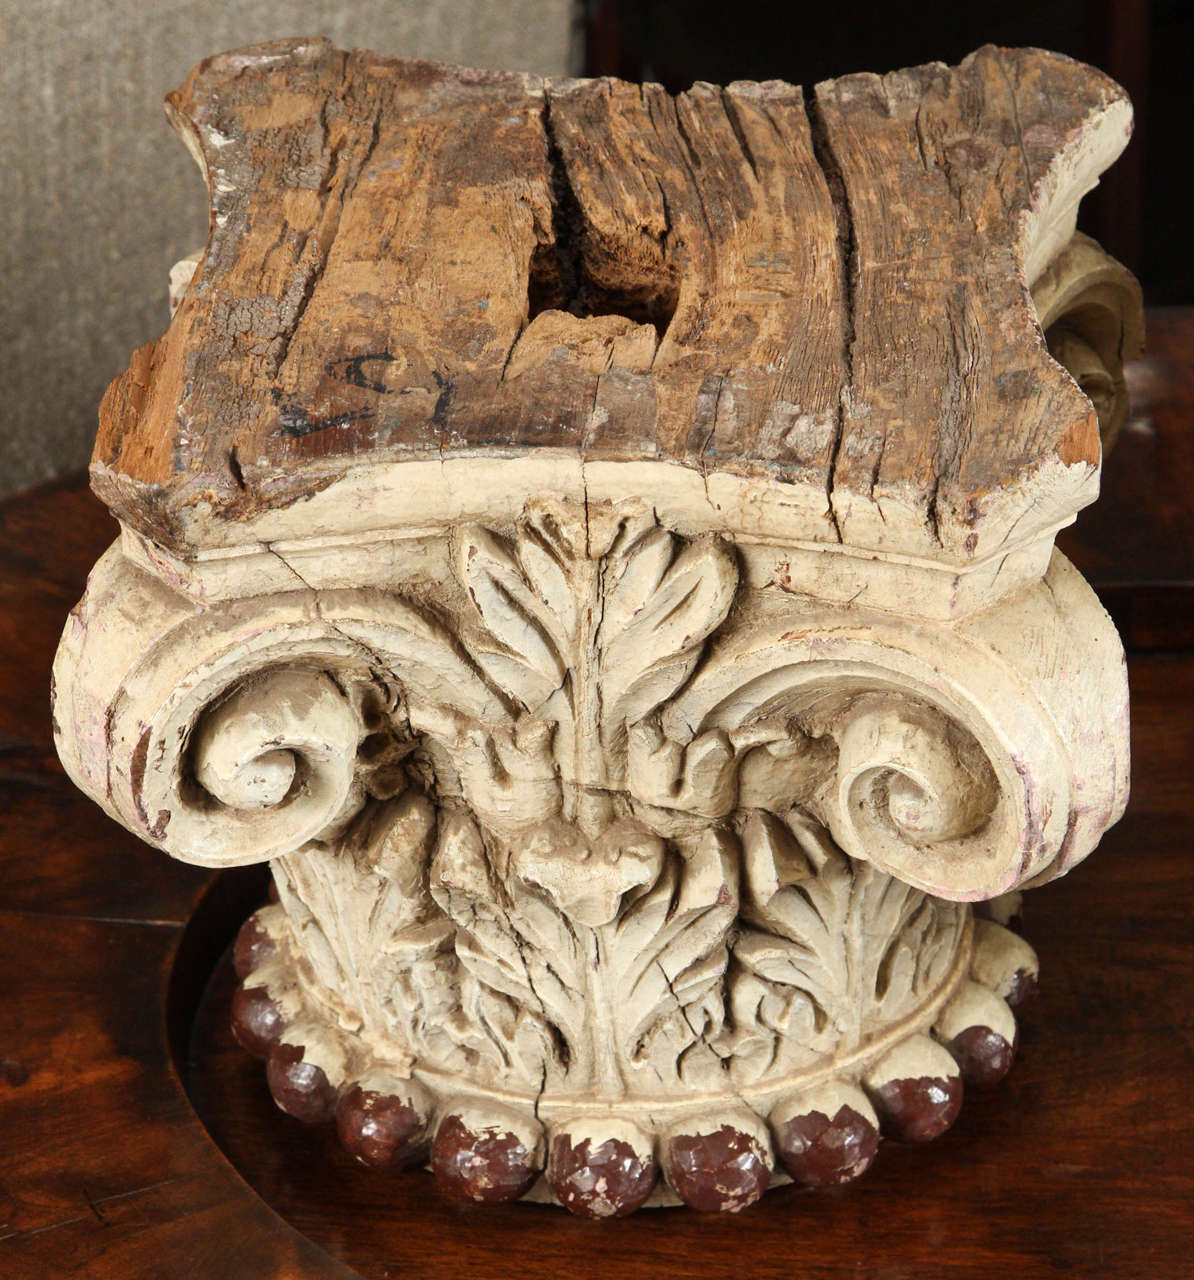 Pair of ivory painted capitals from 19th century Italy, great as sculptures or can be made into a lamp.